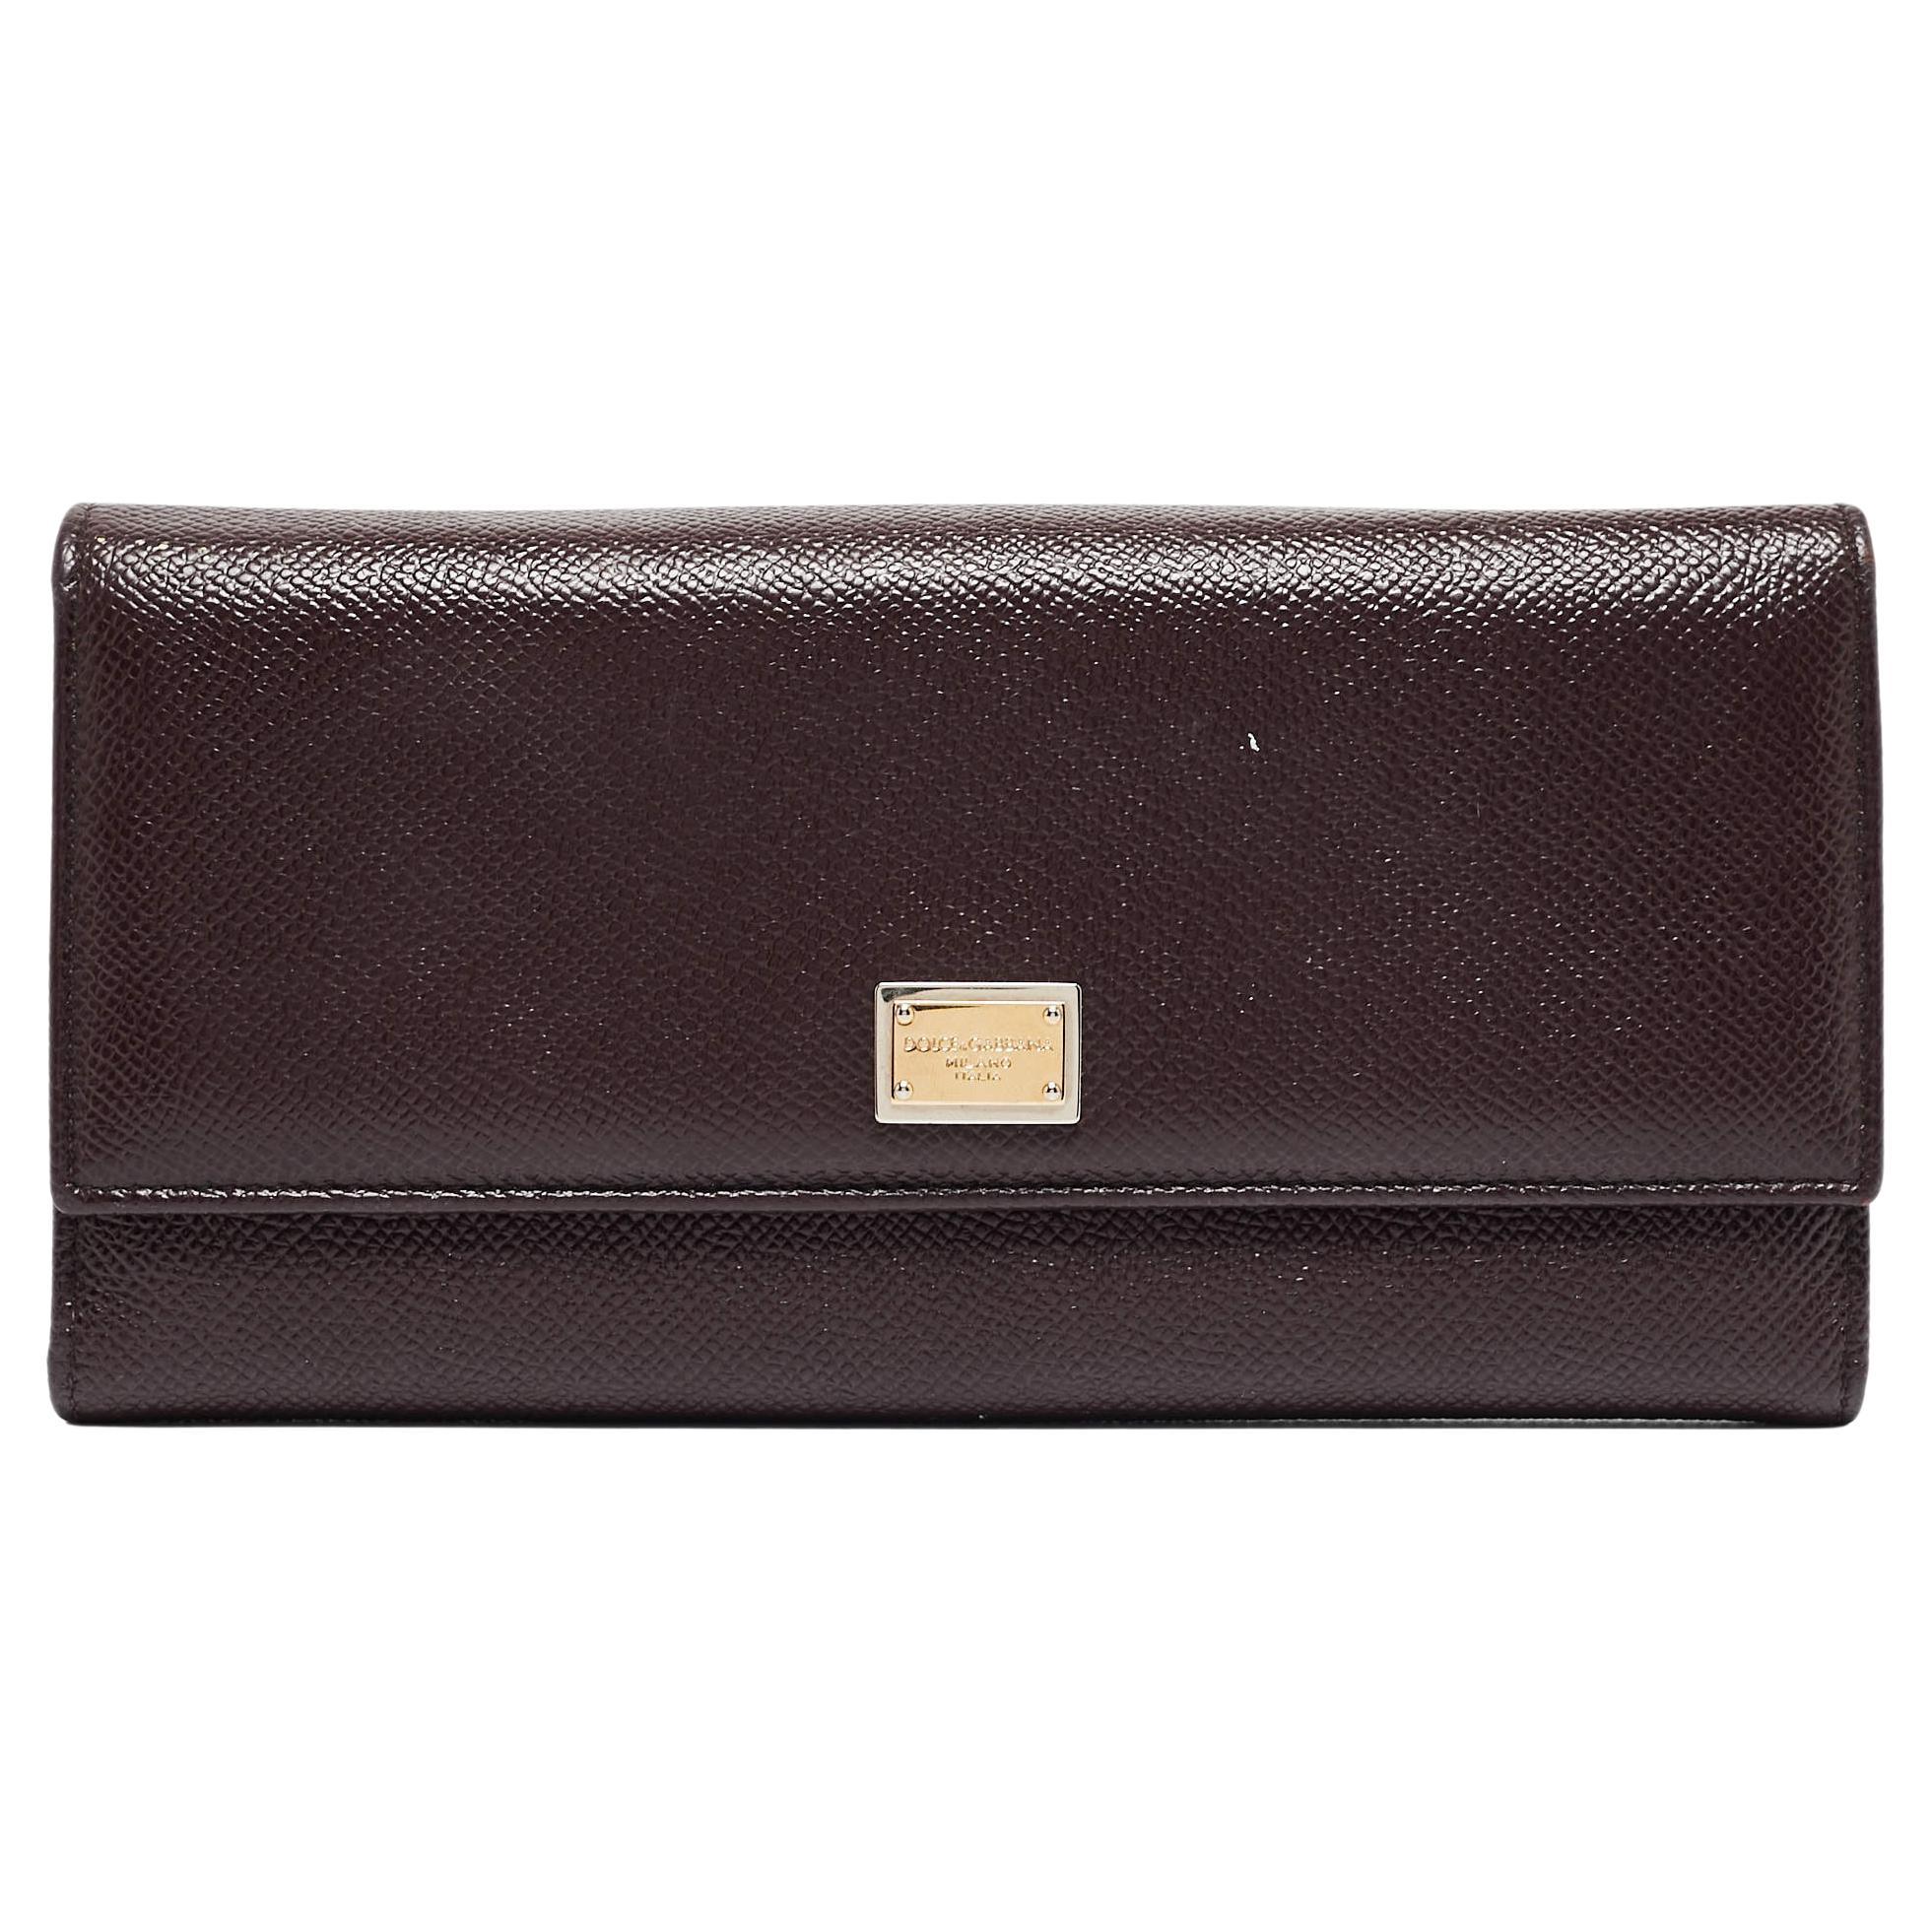 Dolce & Gabbana Dark Brown Leather Dauphine Flap Continental Wallet For Sale